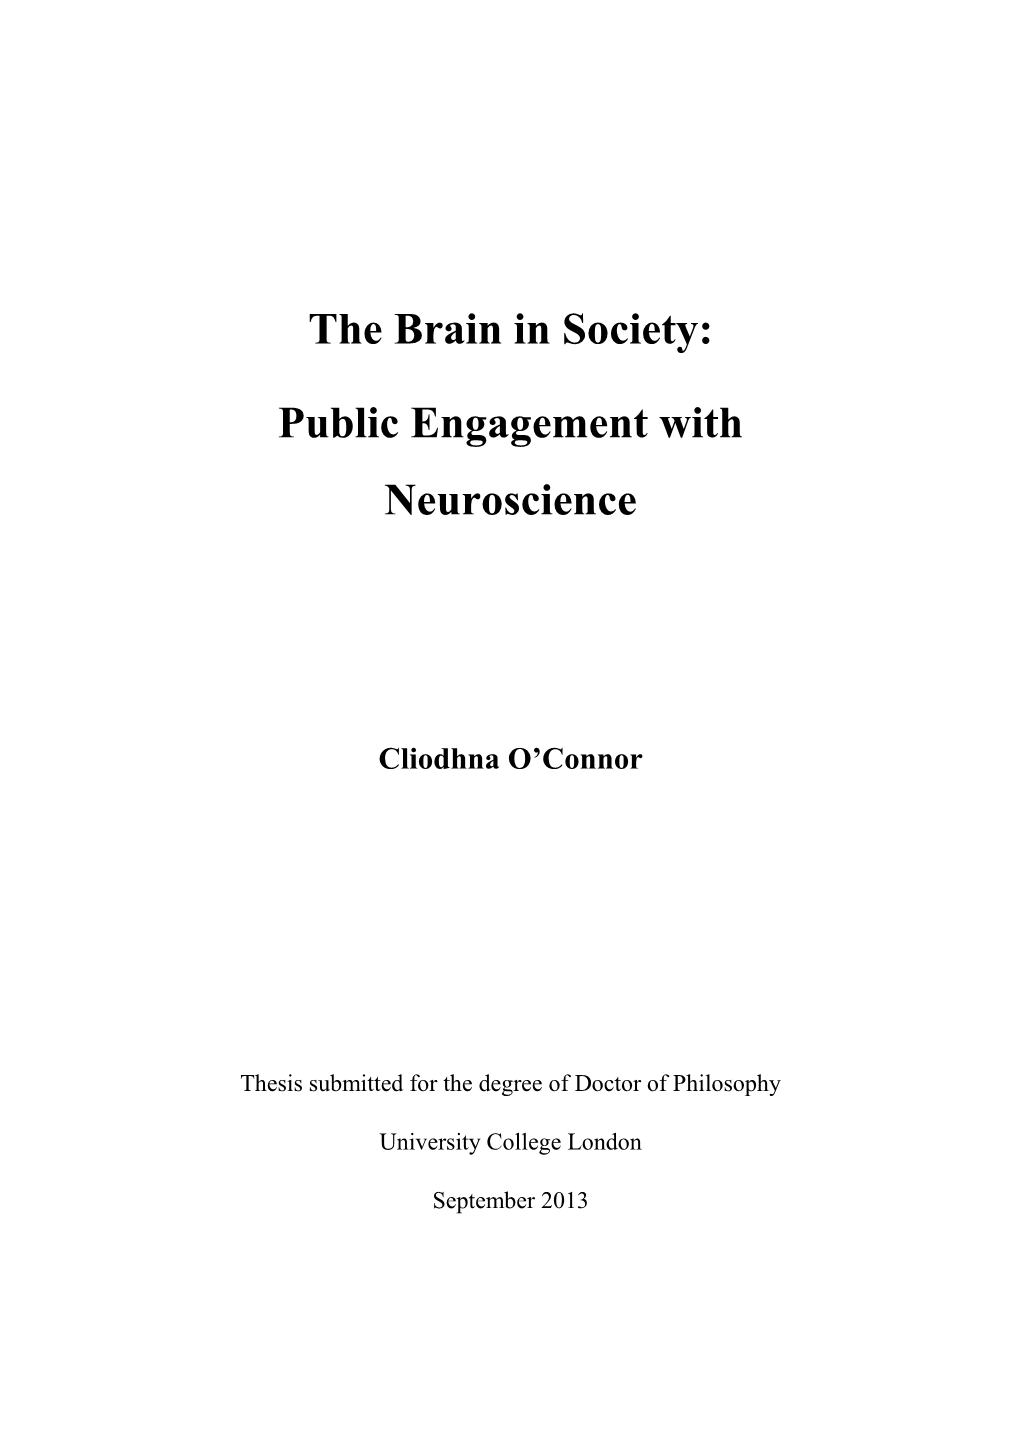 Public Engagement with Neuroscience